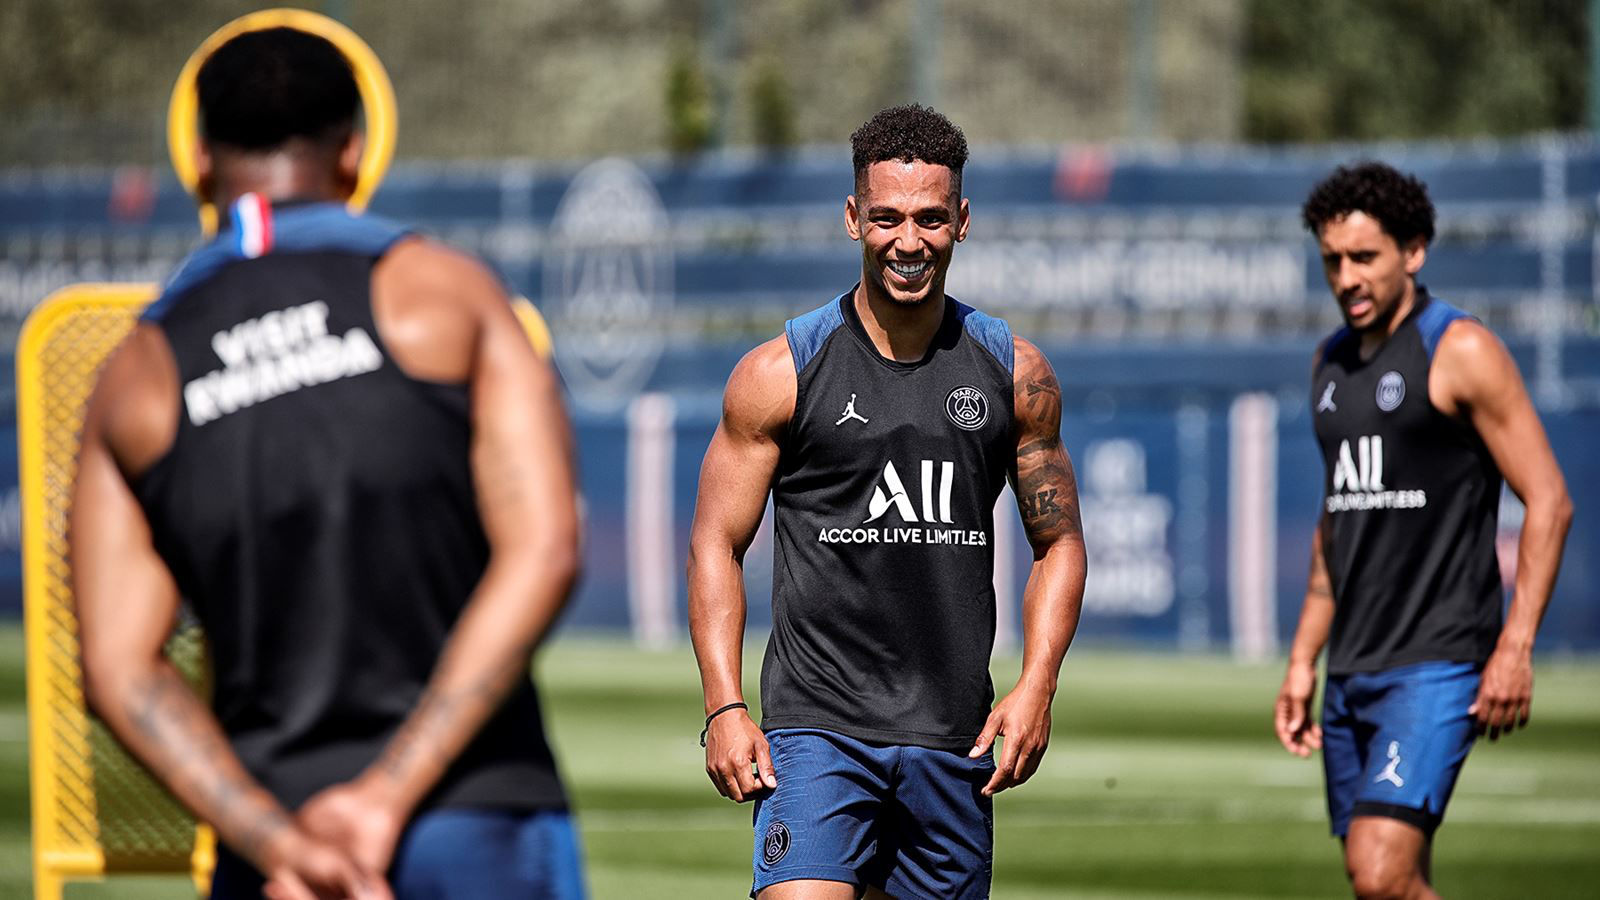 We Need to Talk About Kehrer's New Physique - PSG Talk